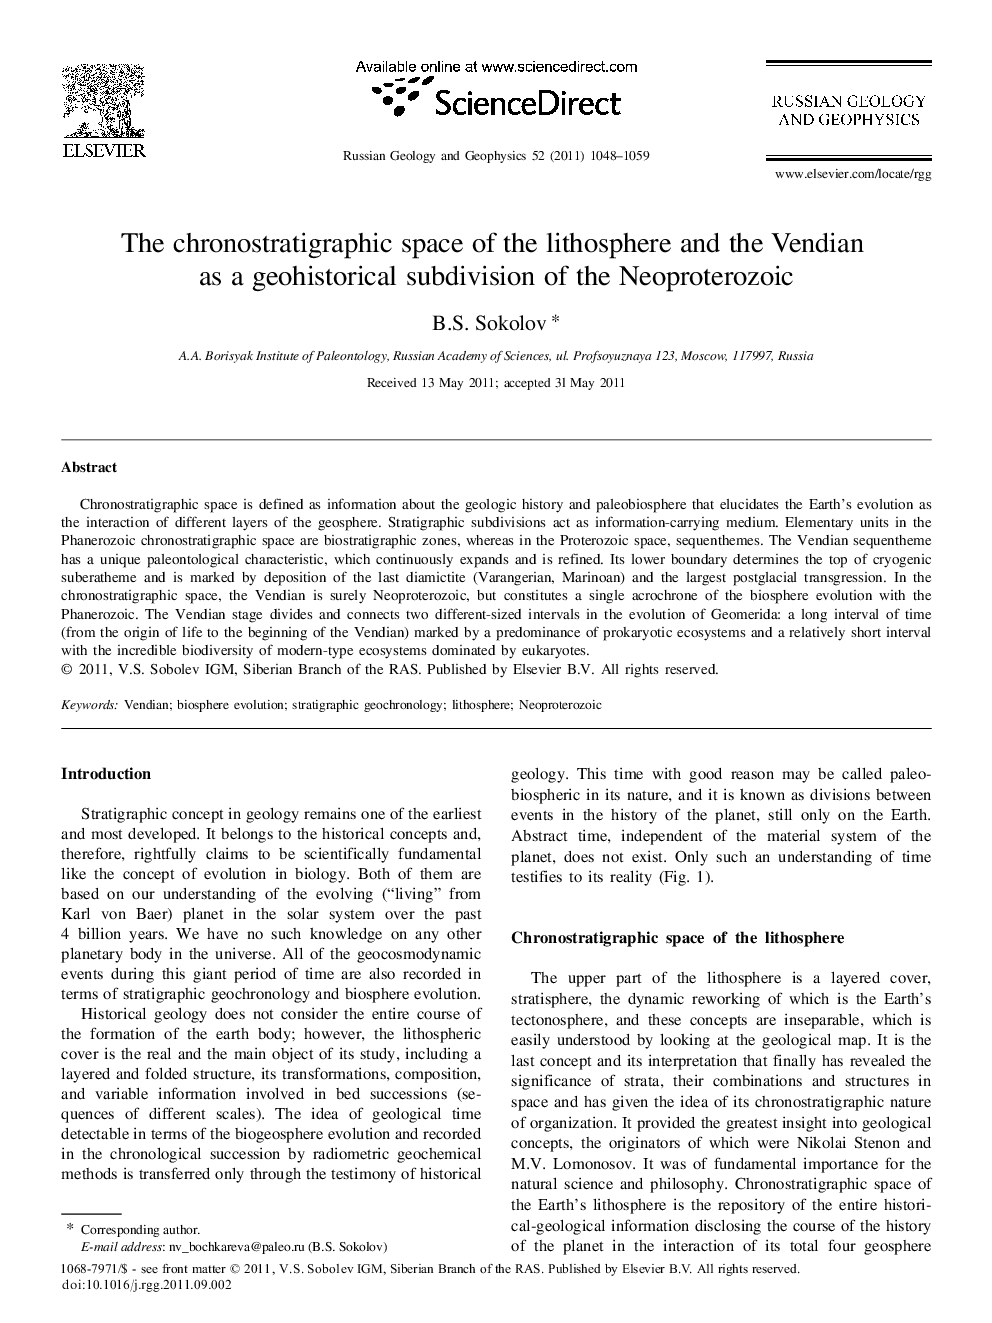 The chronostratigraphic space of the lithosphere and the Vendian as a geohistorical subdivision of the Neoproterozoic